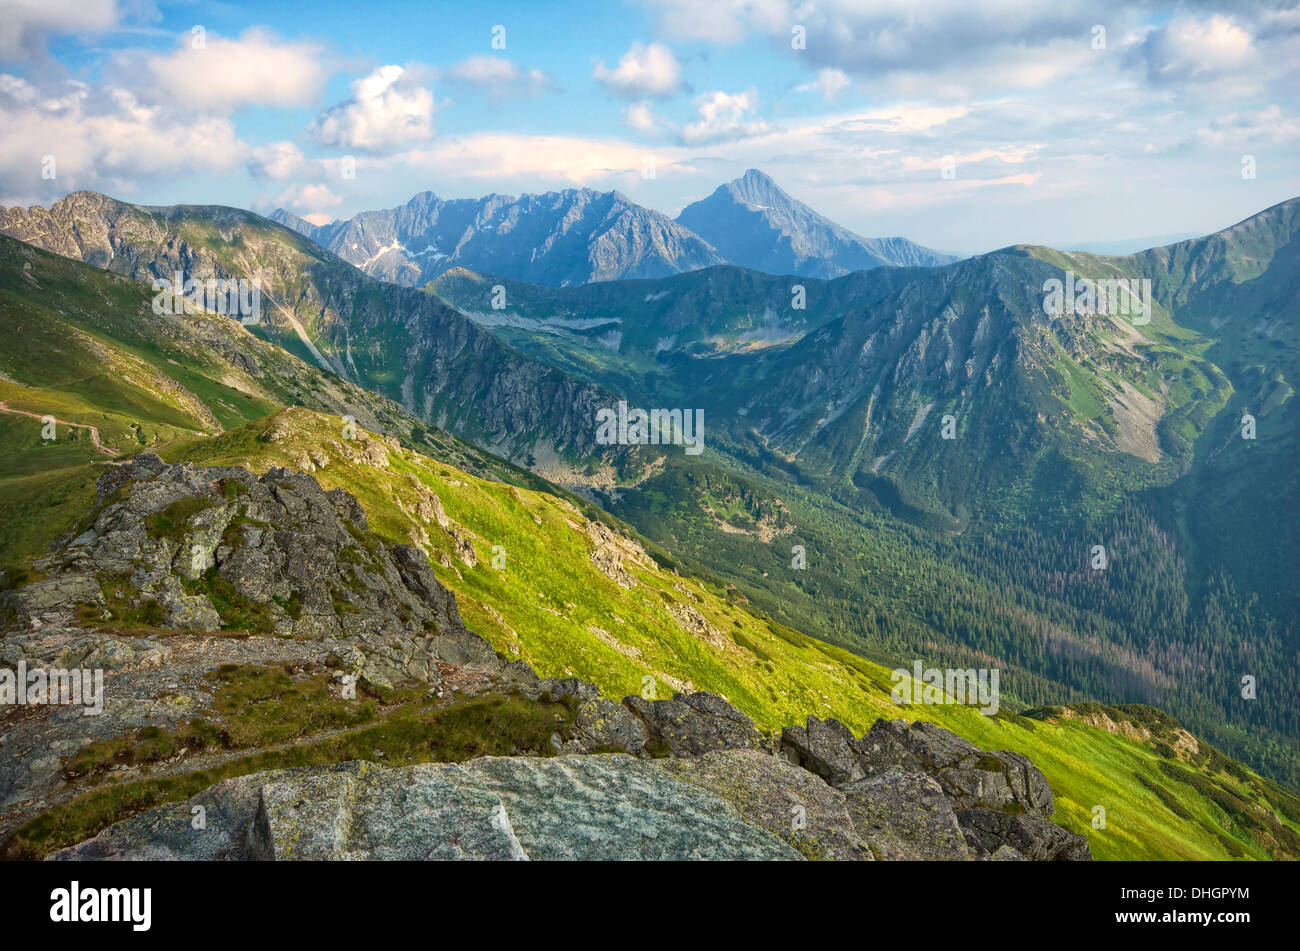 View from Kasprowy Wierch in High Tatra Mountains, Poland Stock Photo